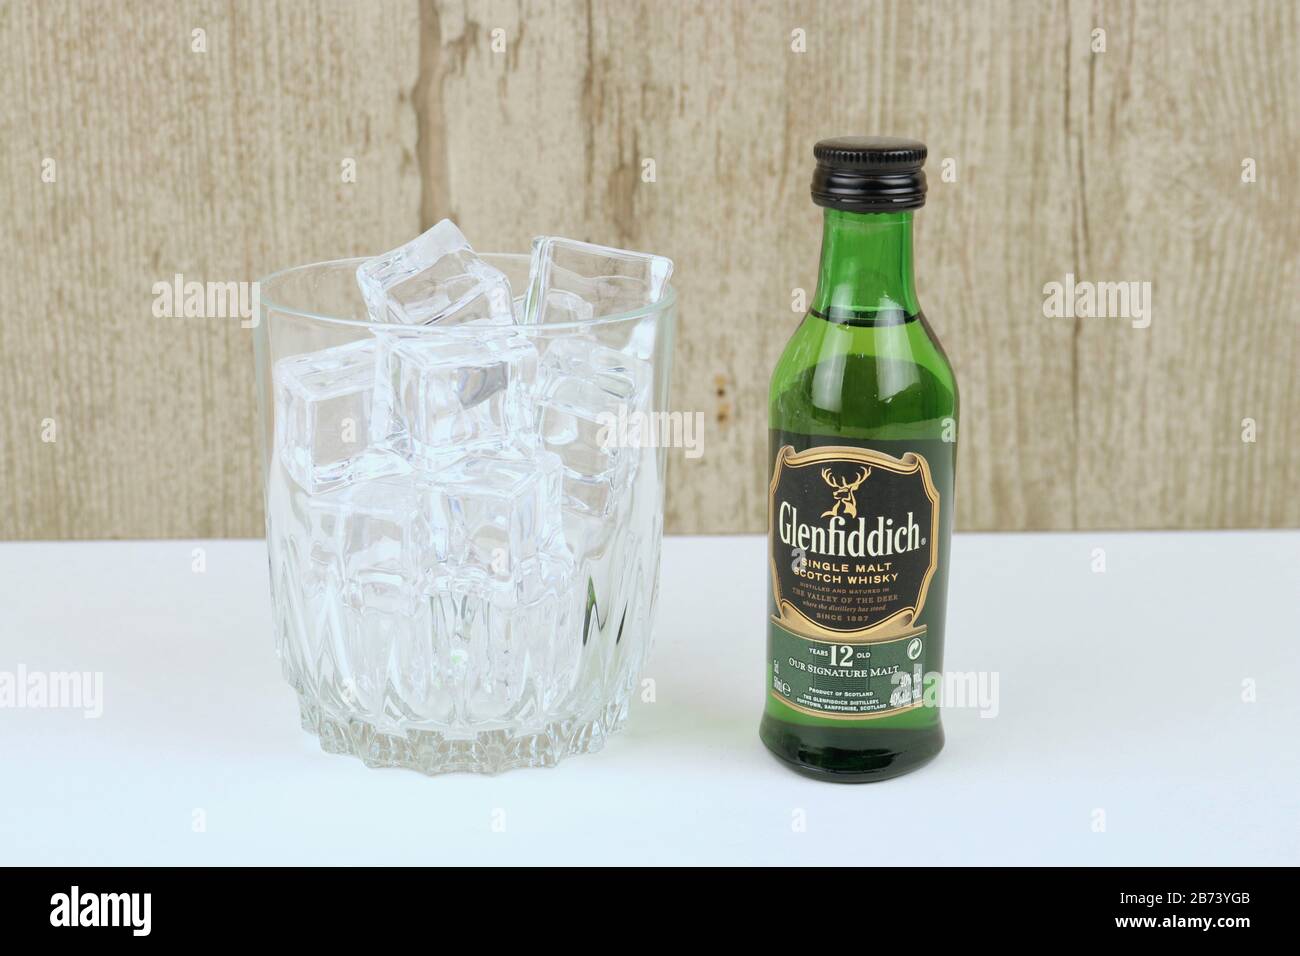 Spencer, Wisconsin, U.S.A. , March, 13, 2020  Bottle of Glenfiddich 12 Year old Scotch Whisky     Glenfiddich is a product of Scotland and was founded Stock Photo